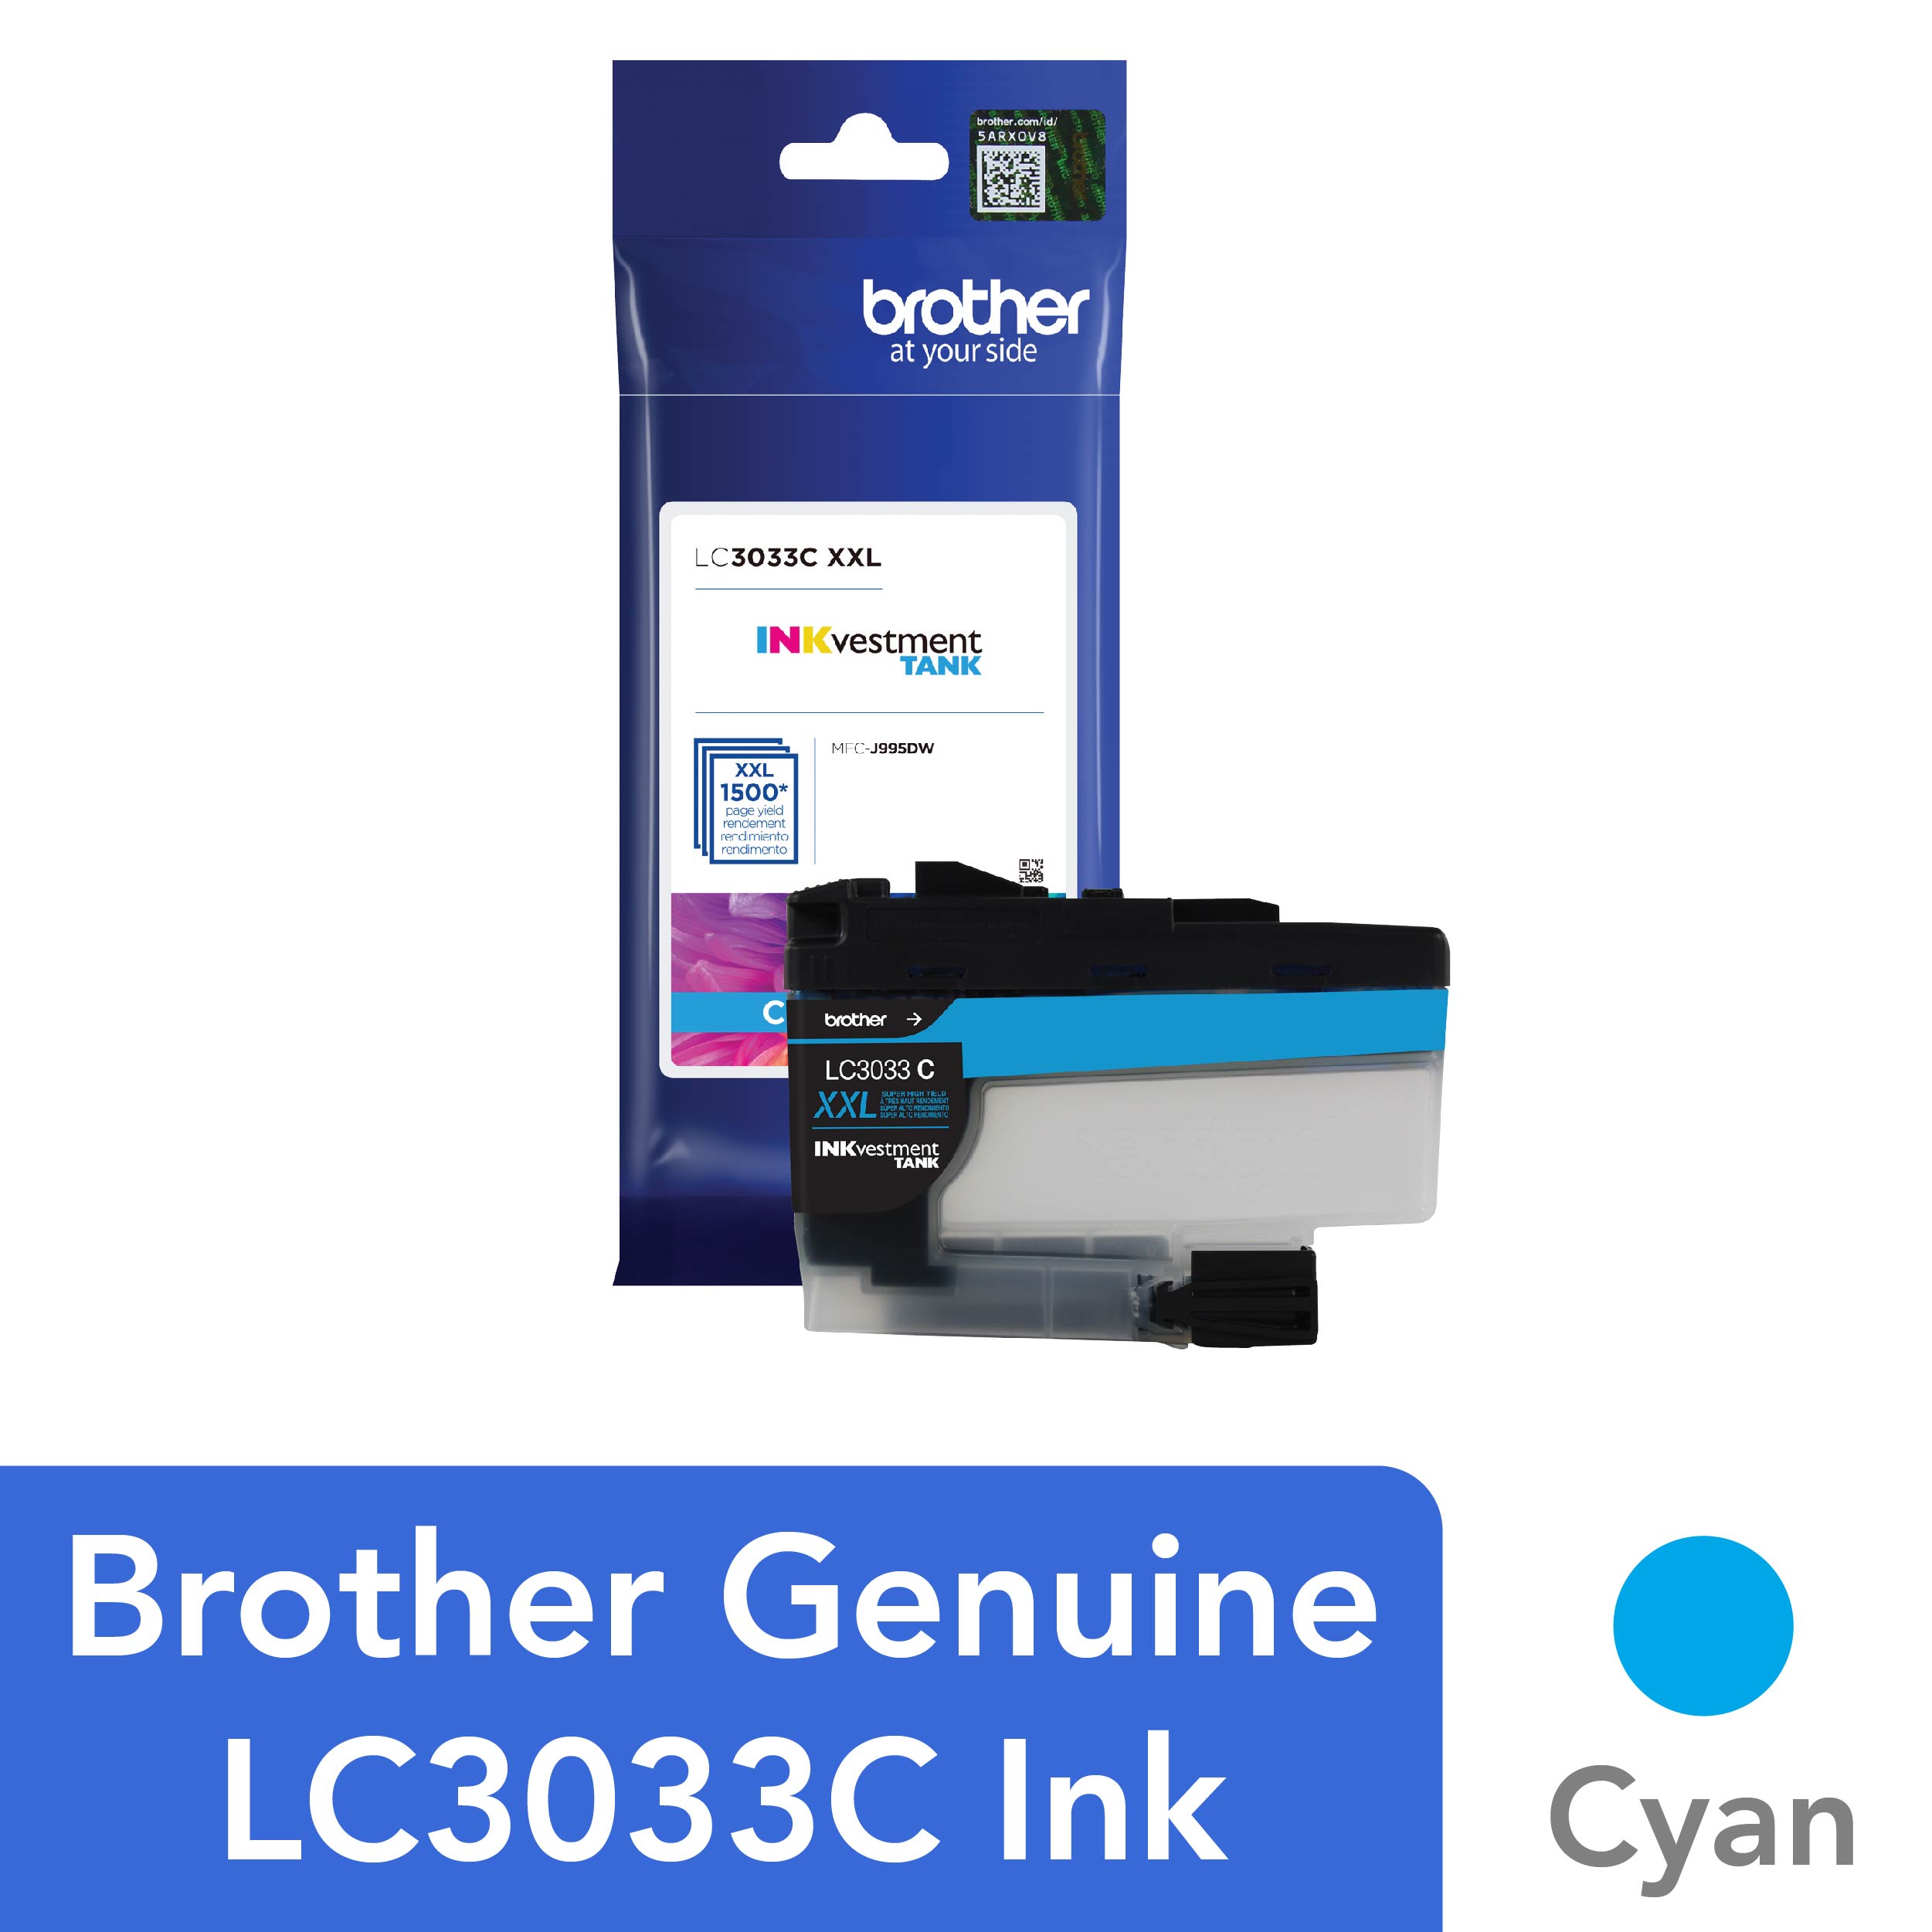 Brother Genuine LC3033C, Single Pack Super High-yield Cyan INKvestment Tank Ink Cartridge, Page Yield Up To 1,500 Pages, LC3033 - image 1 of 6